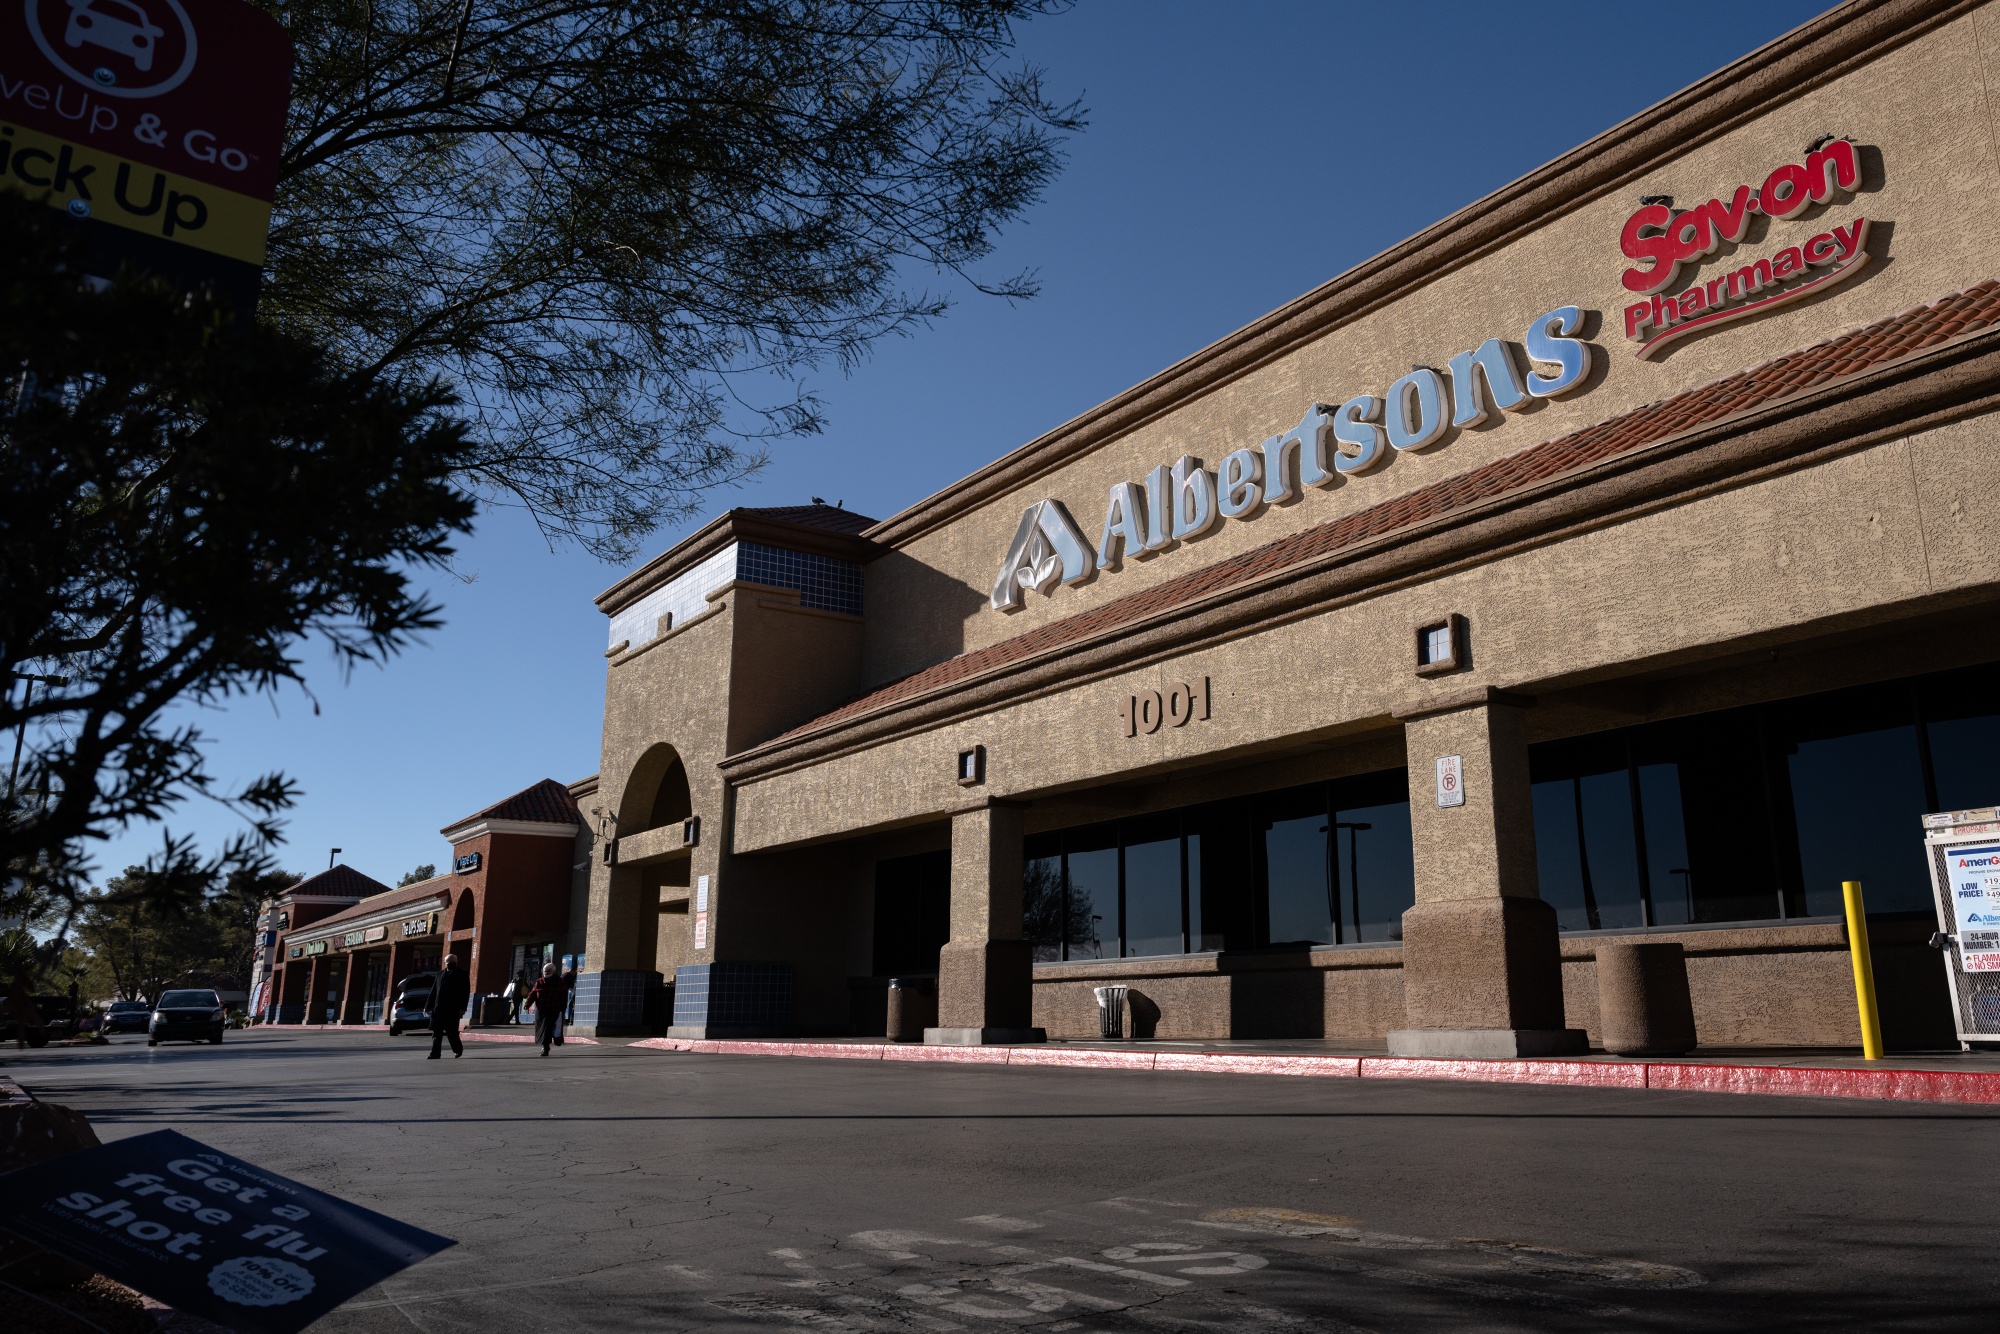 15 Albertsons in Nevada to be sold in planned Kroger-Albertsons merger